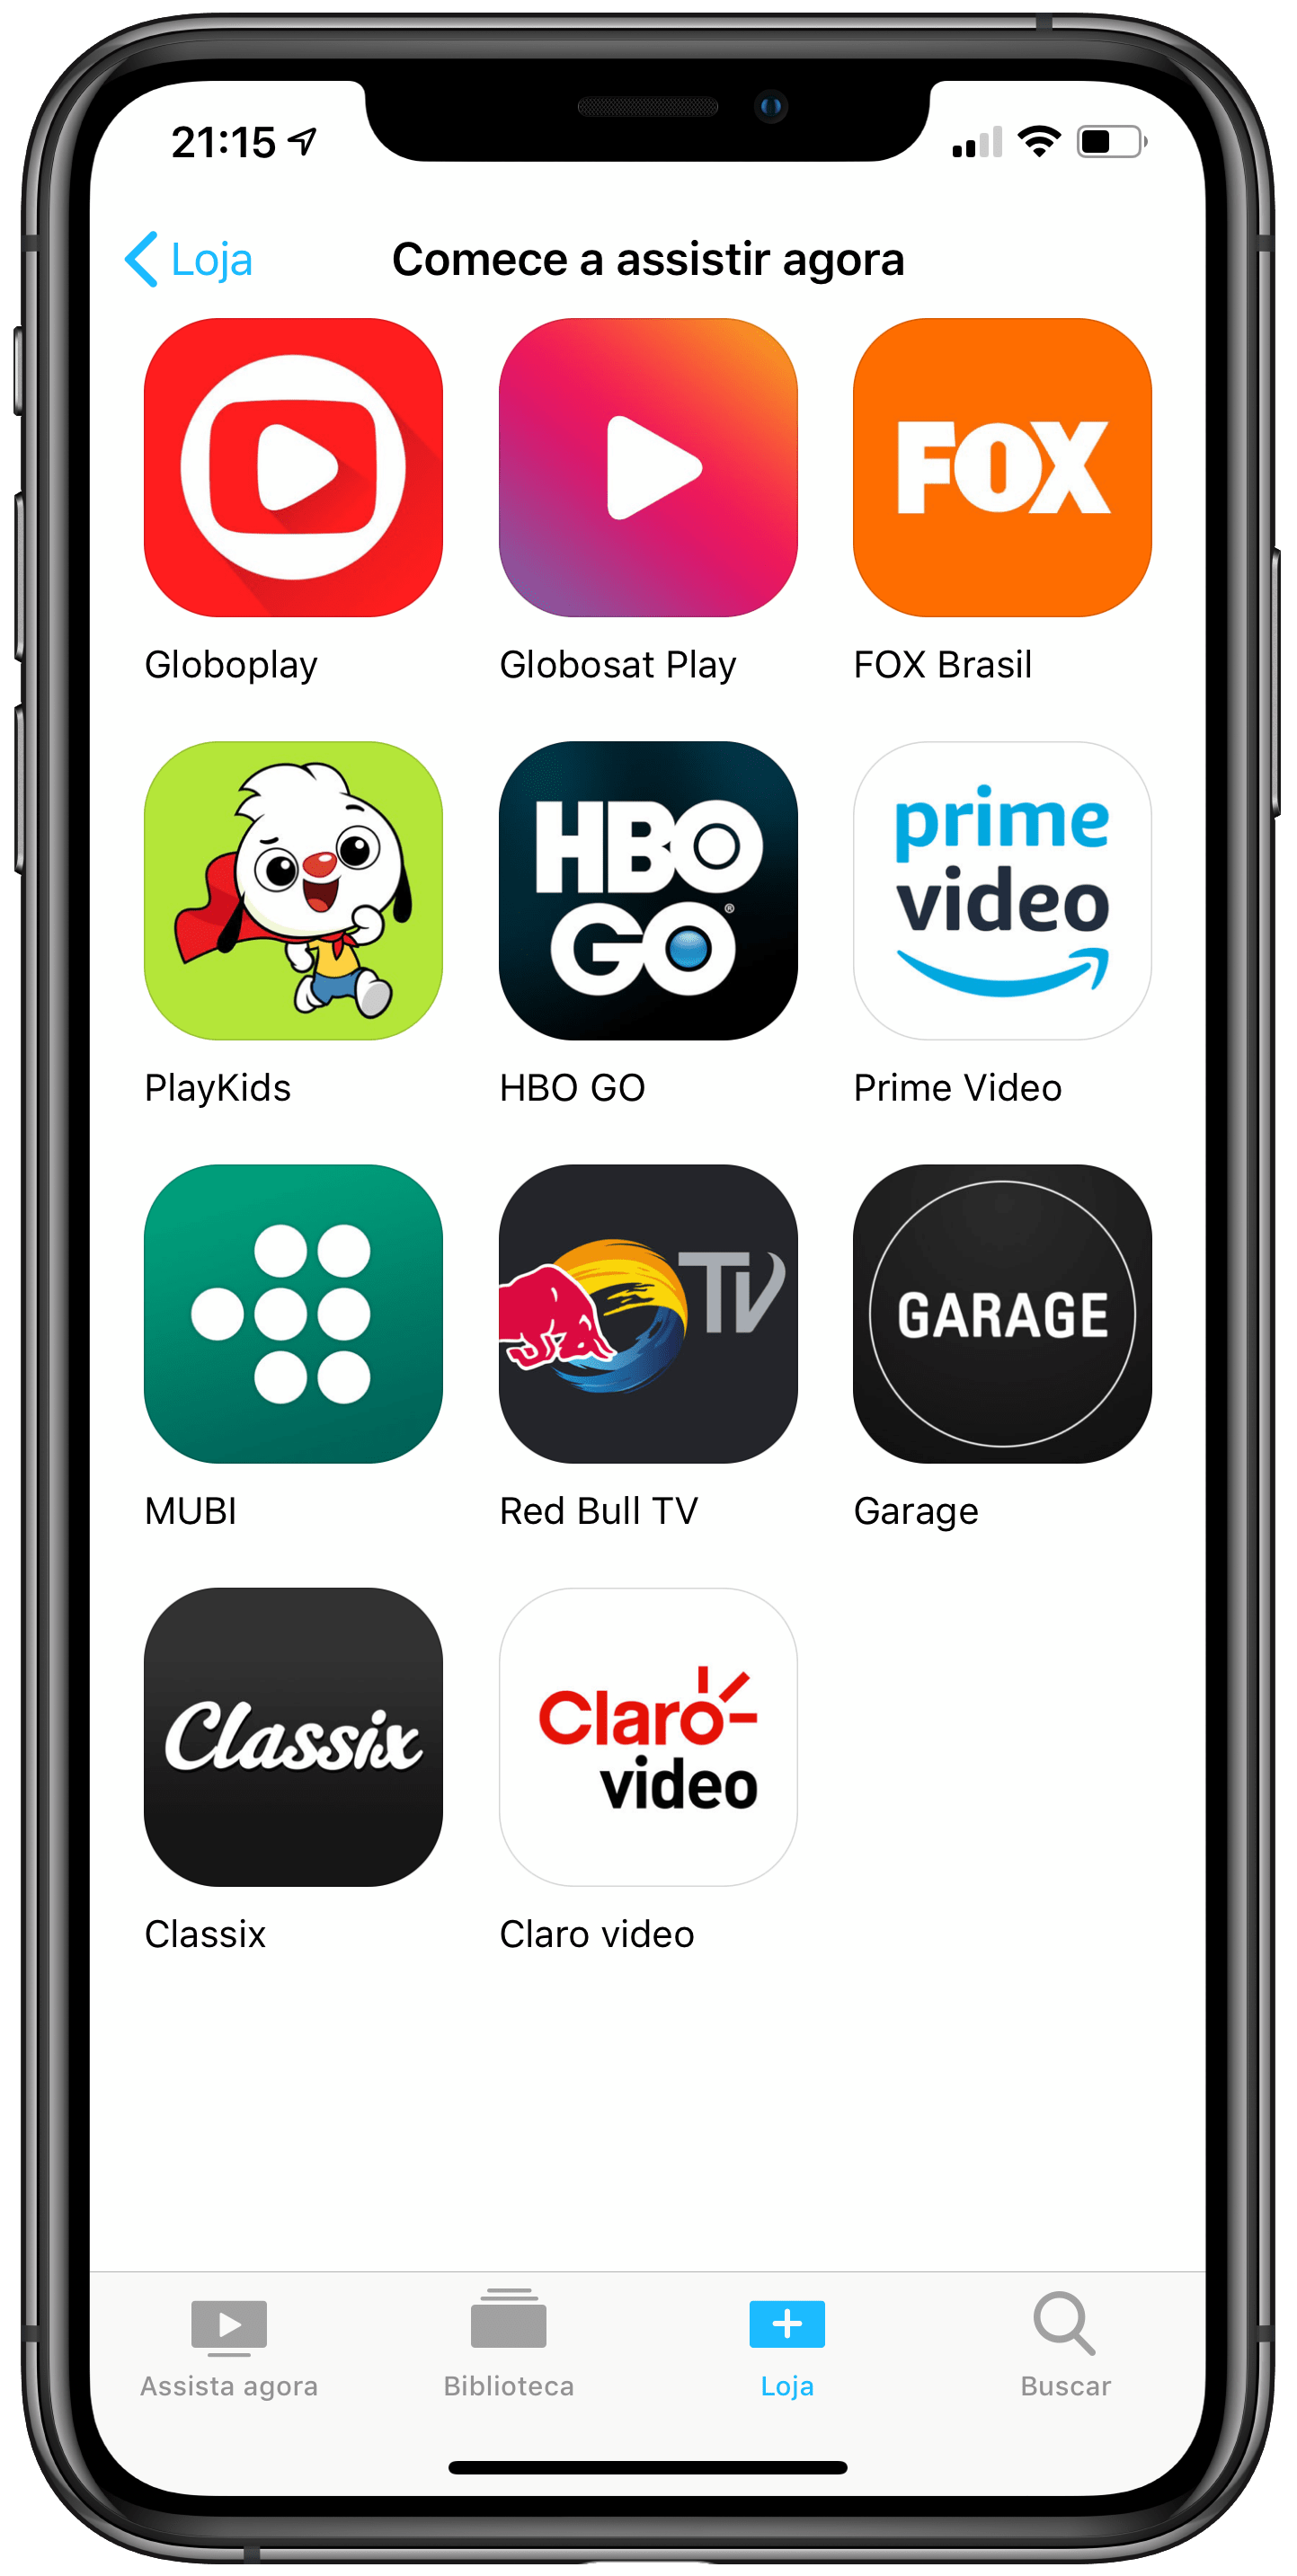 Globosat Play in the TV app on an iPhone XS Max